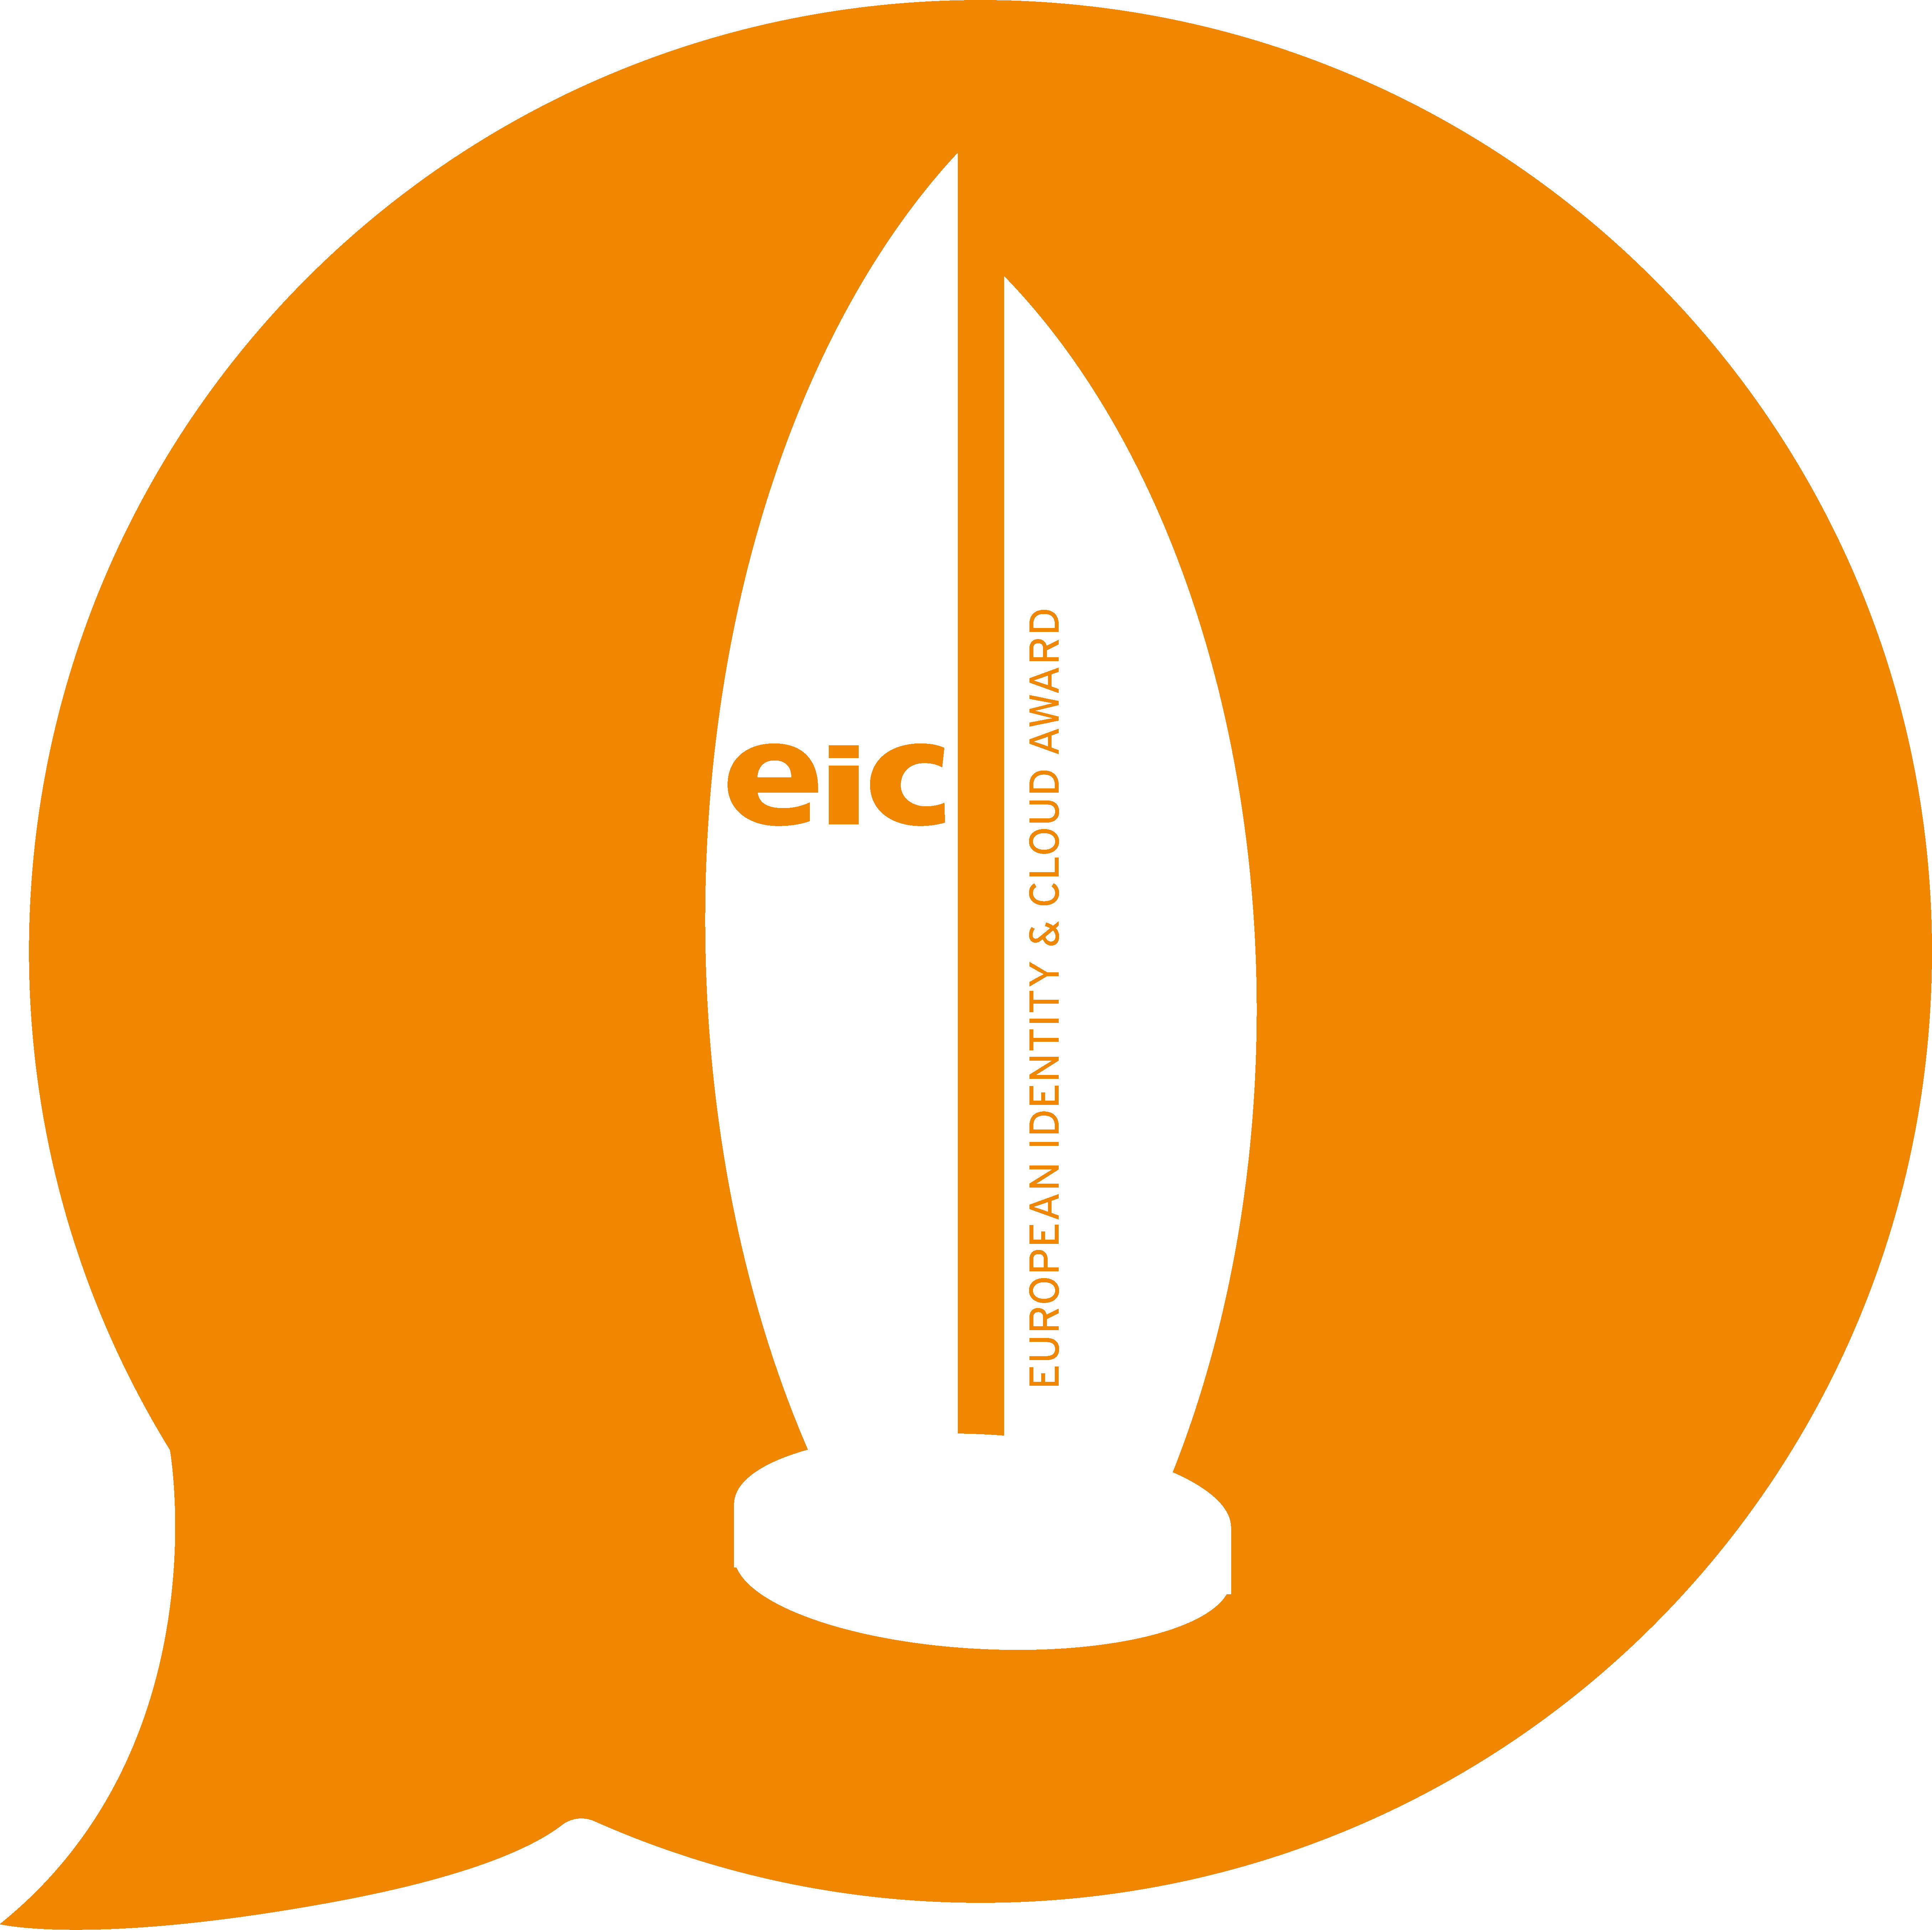 European Identity and Cloud Awards 2021